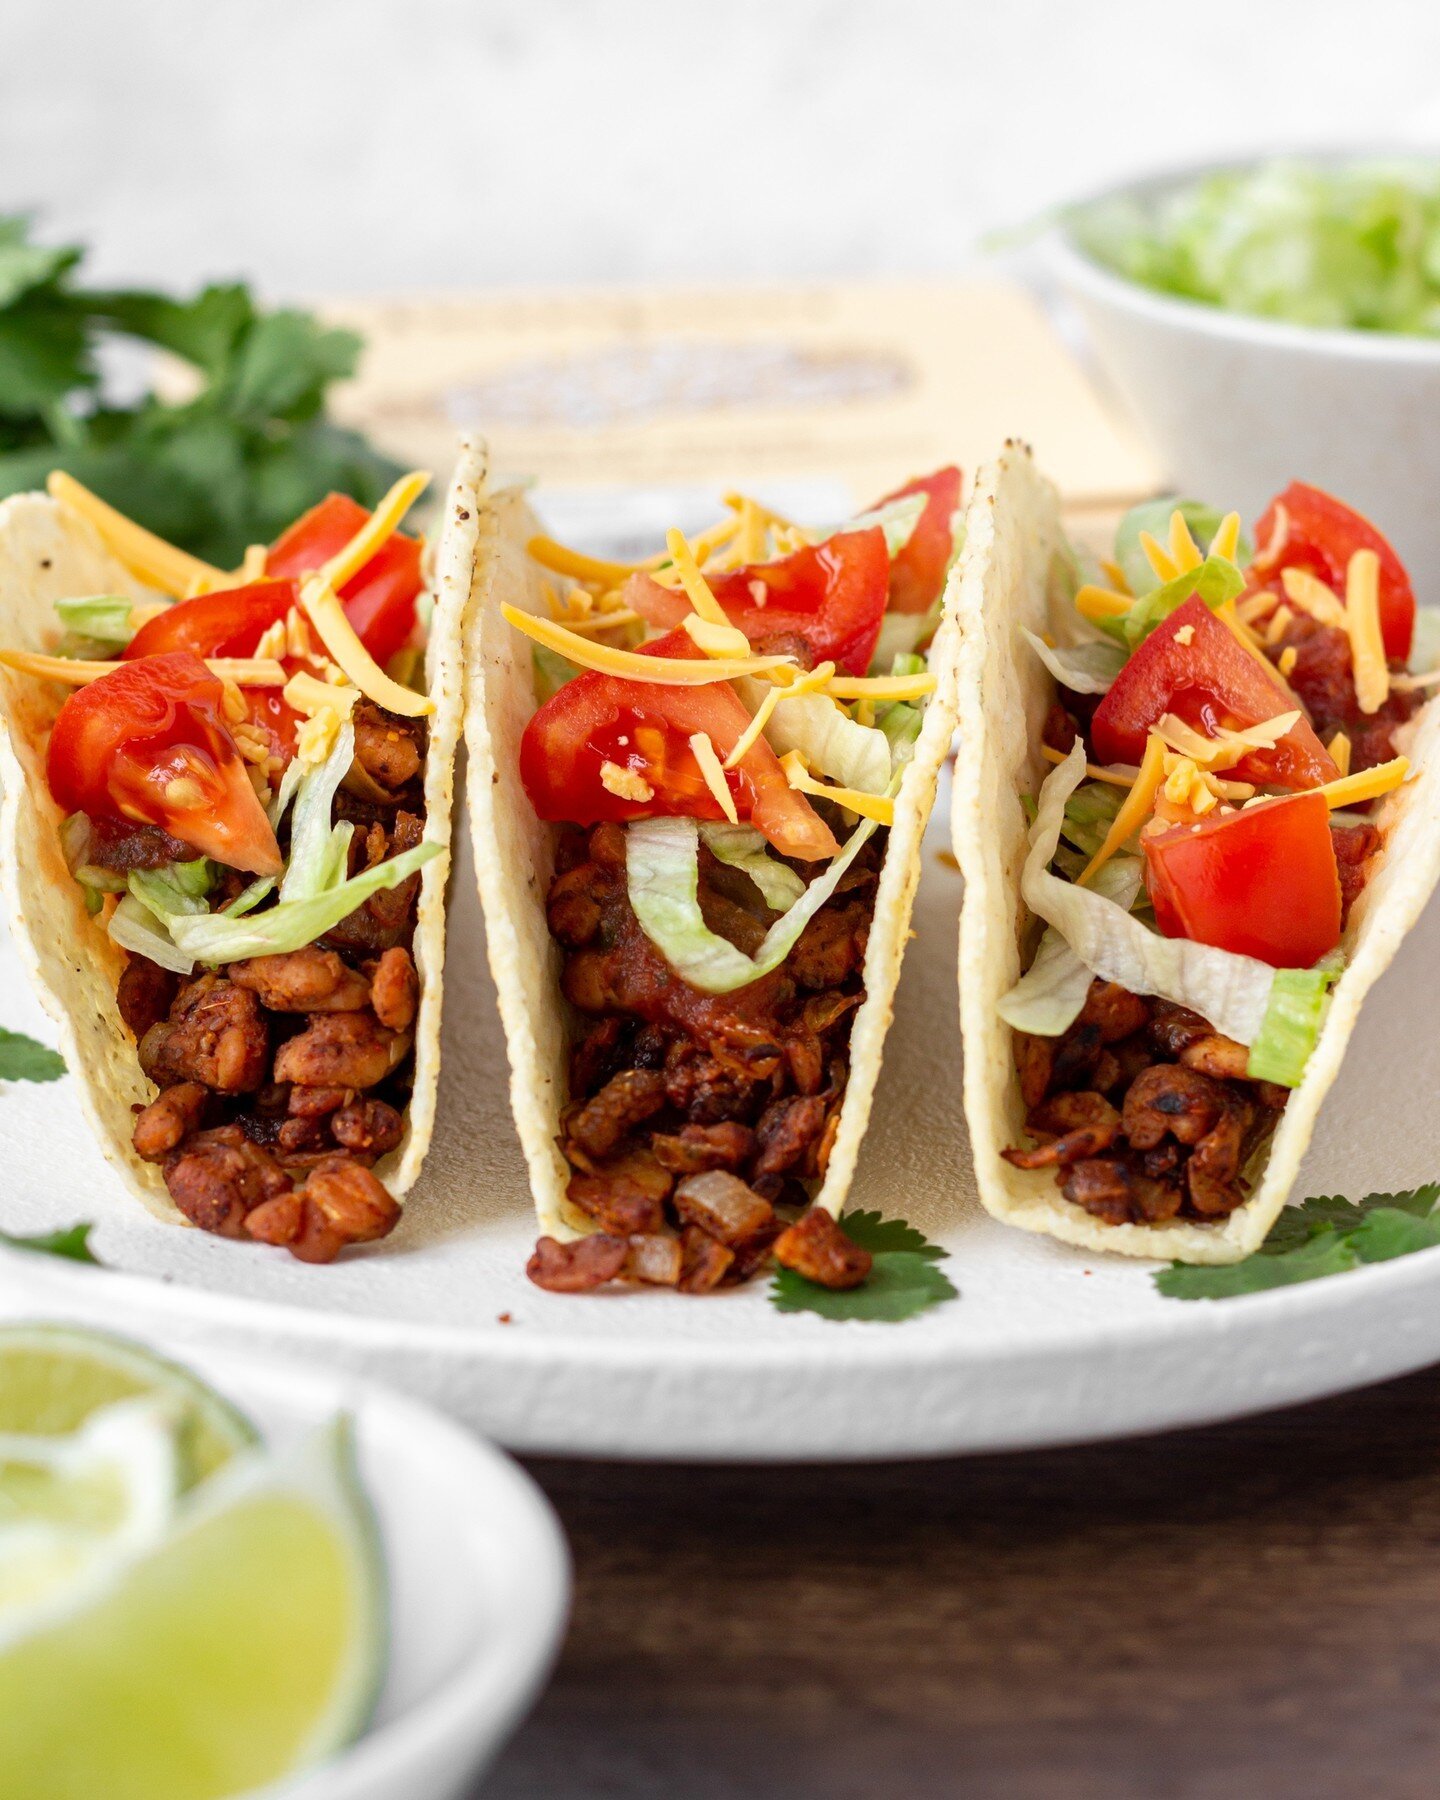 It&rsquo;s Tuesday! And you know what that means, right?⁠
⁠
🌮 IT&rsquo;S TACO TIME!⁠
⁠
If you haven&rsquo;t yet, why not try adding tempeh to your meatless taco? We promise you won&rsquo;t be disappointed 😉